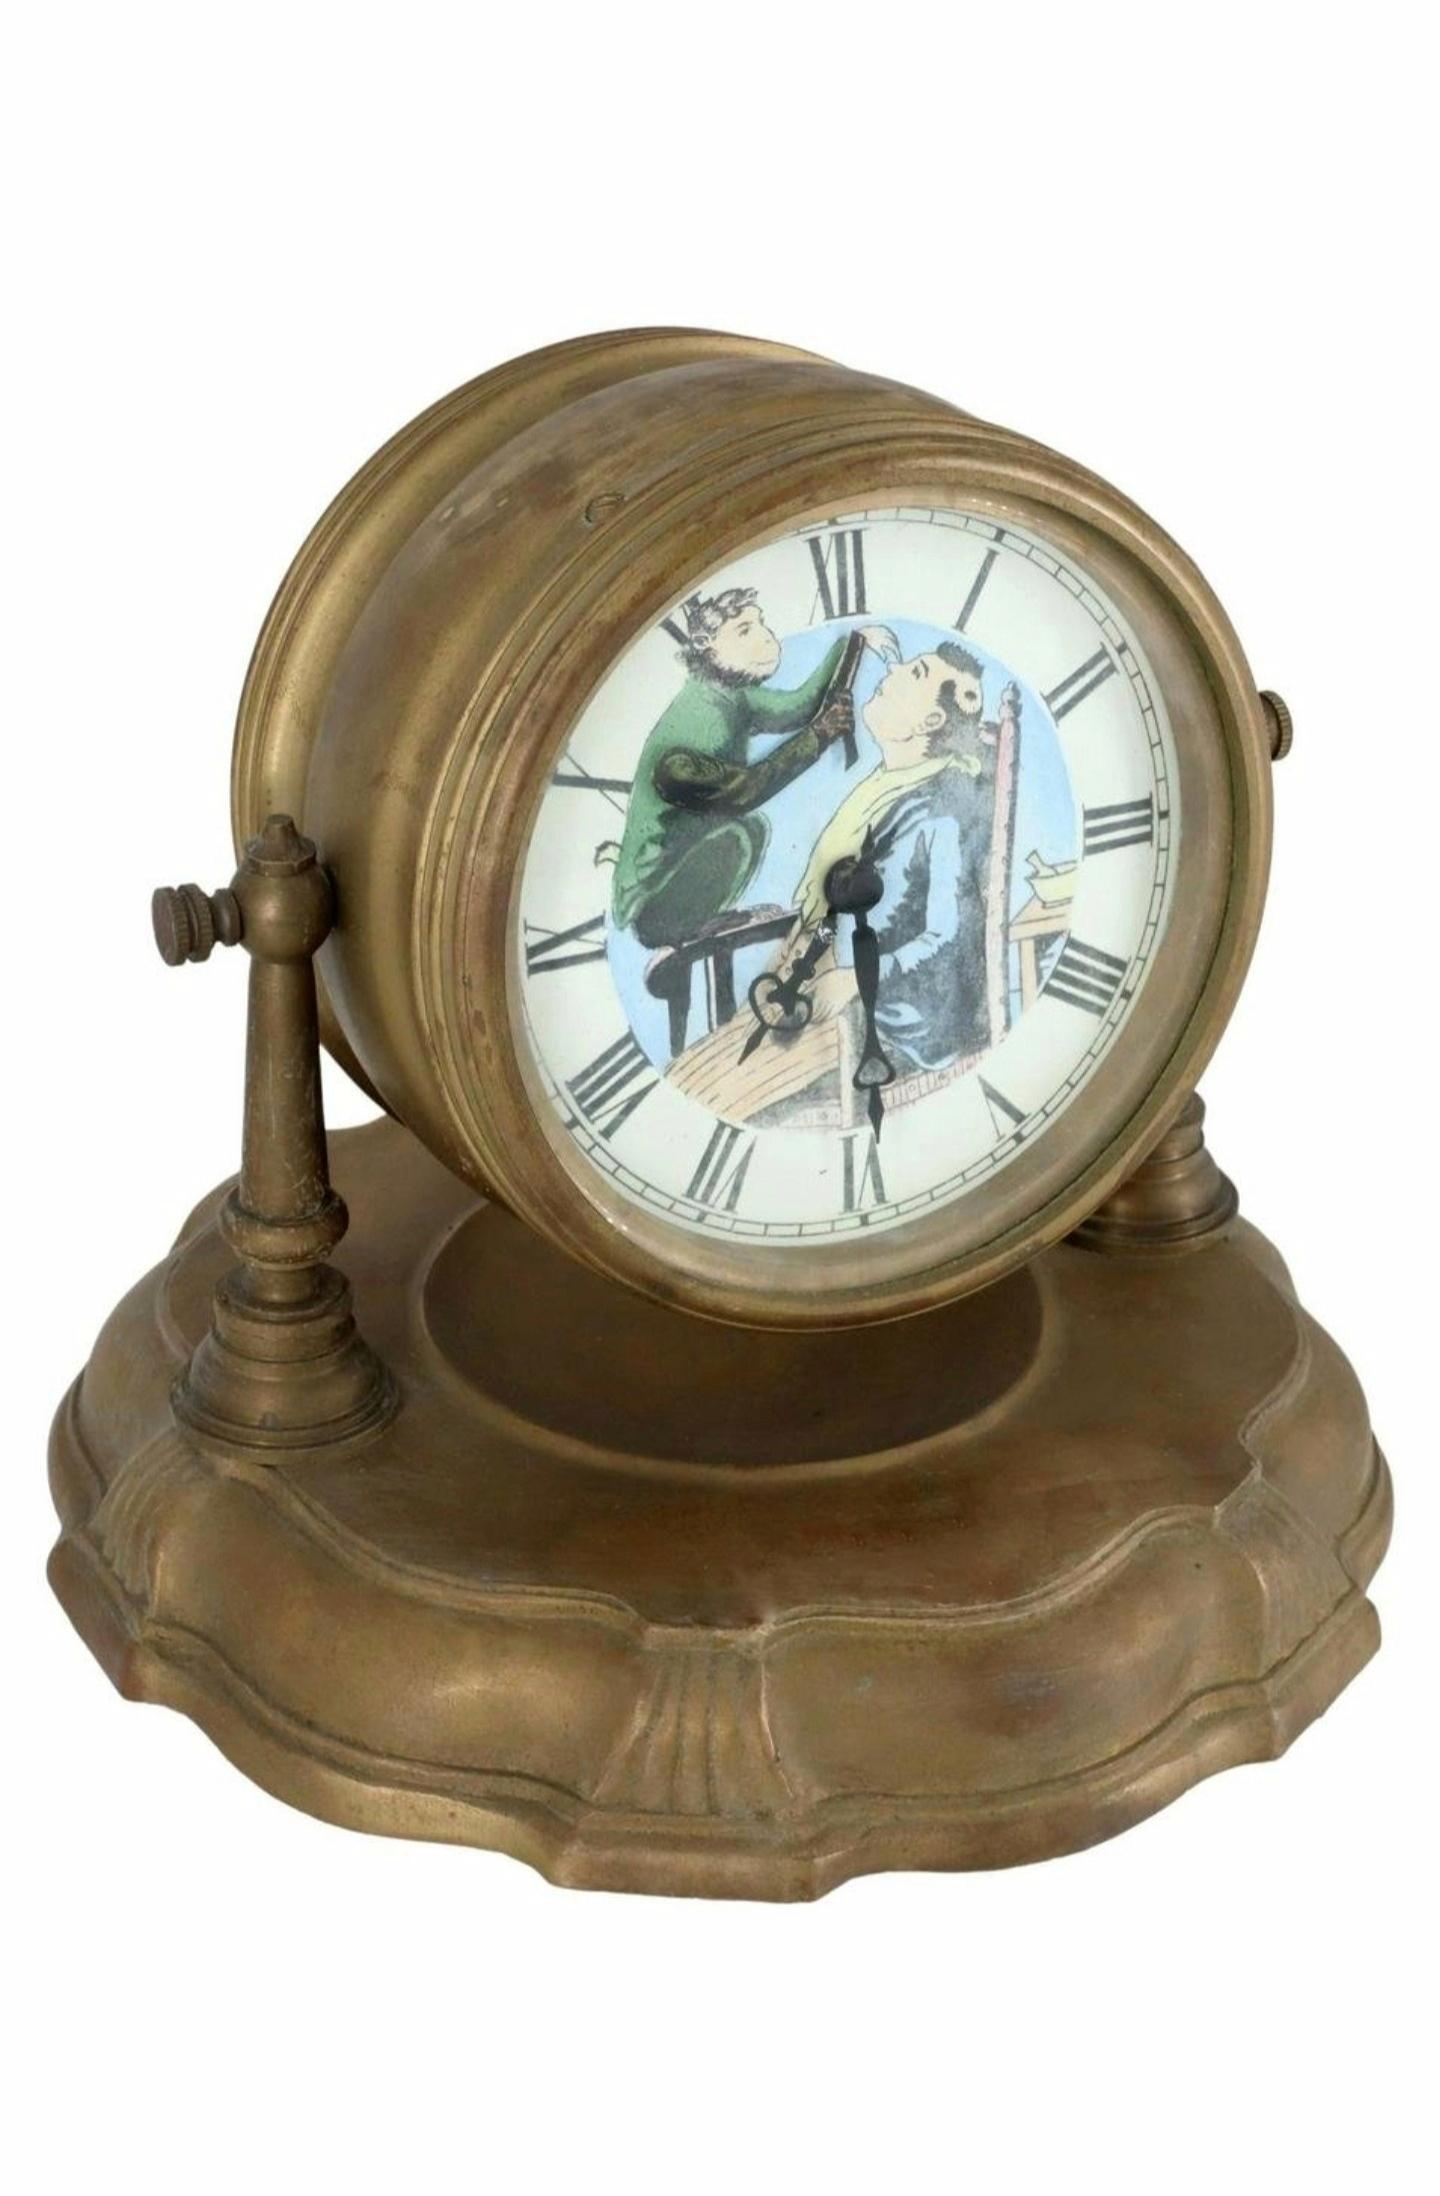 A most amusing late 19th / early 20th century animated novelty clock, depicting monkey barber giving a haircut with disastrous results.

Art Nouveau period, brass-cased, gimbal supported case hangs above scalloped round base molded with vide poche,